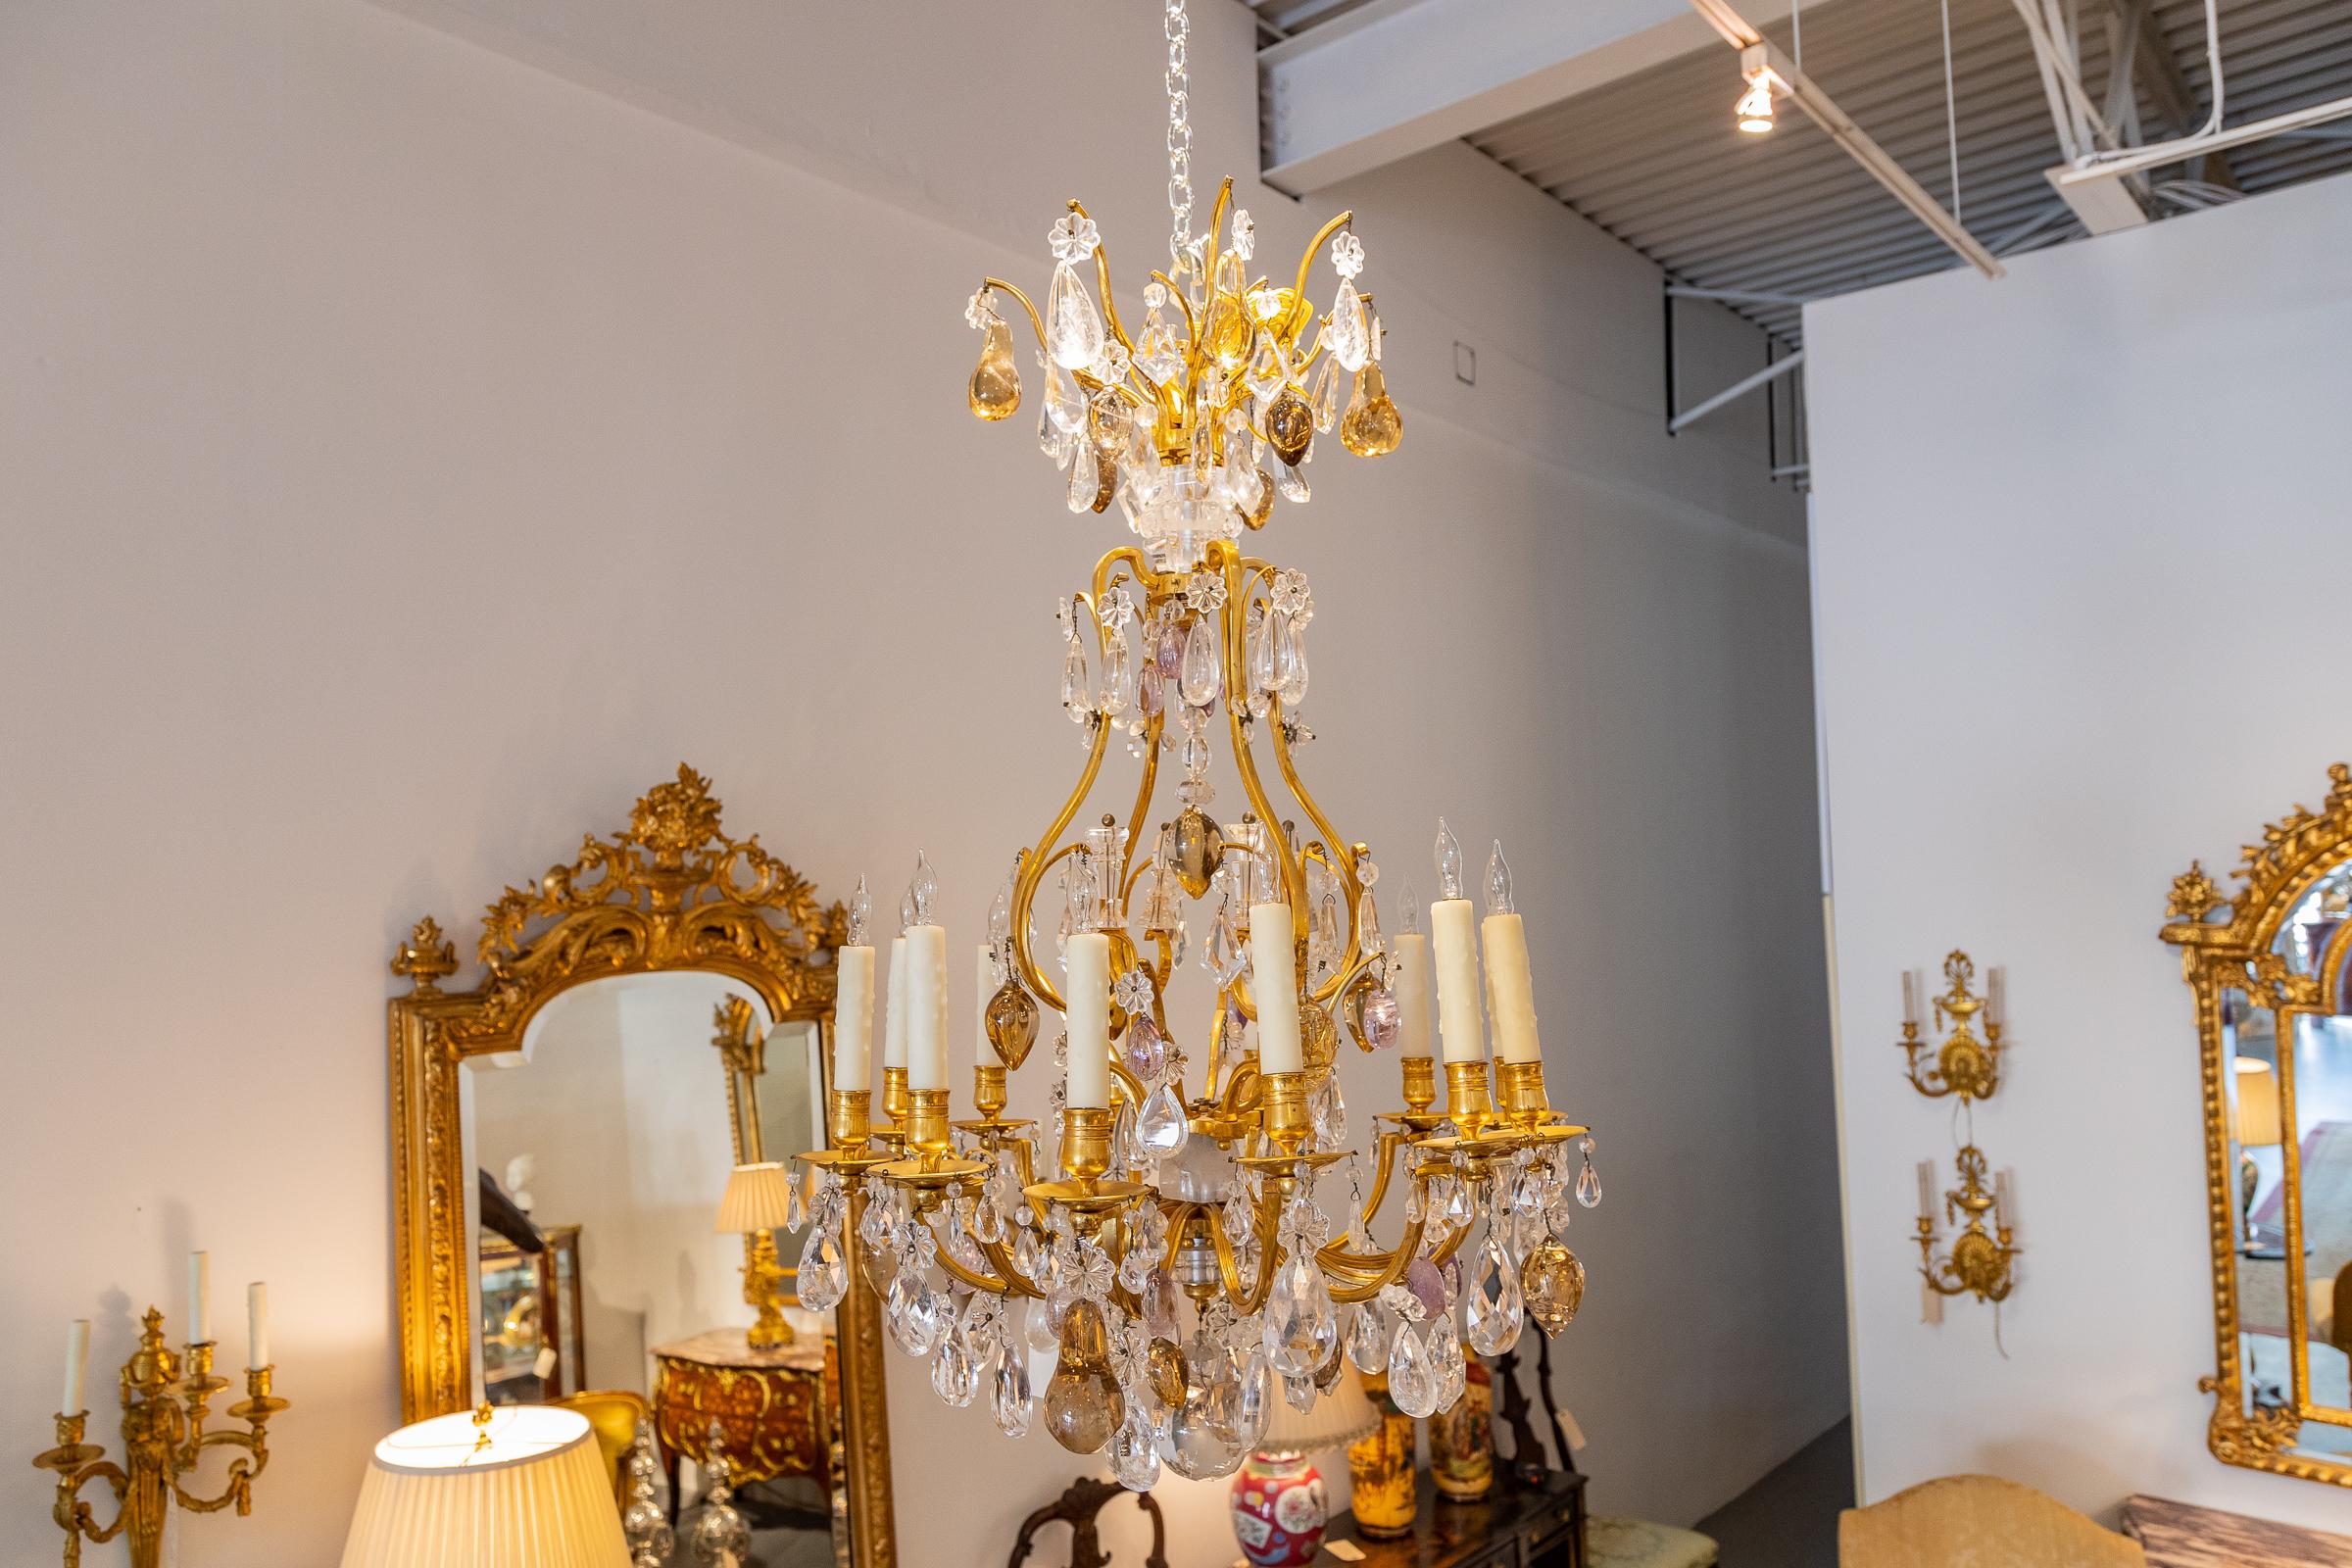 A fine 19th century French Louis XV rock crystal and gilt bronze 12 light chandelier.